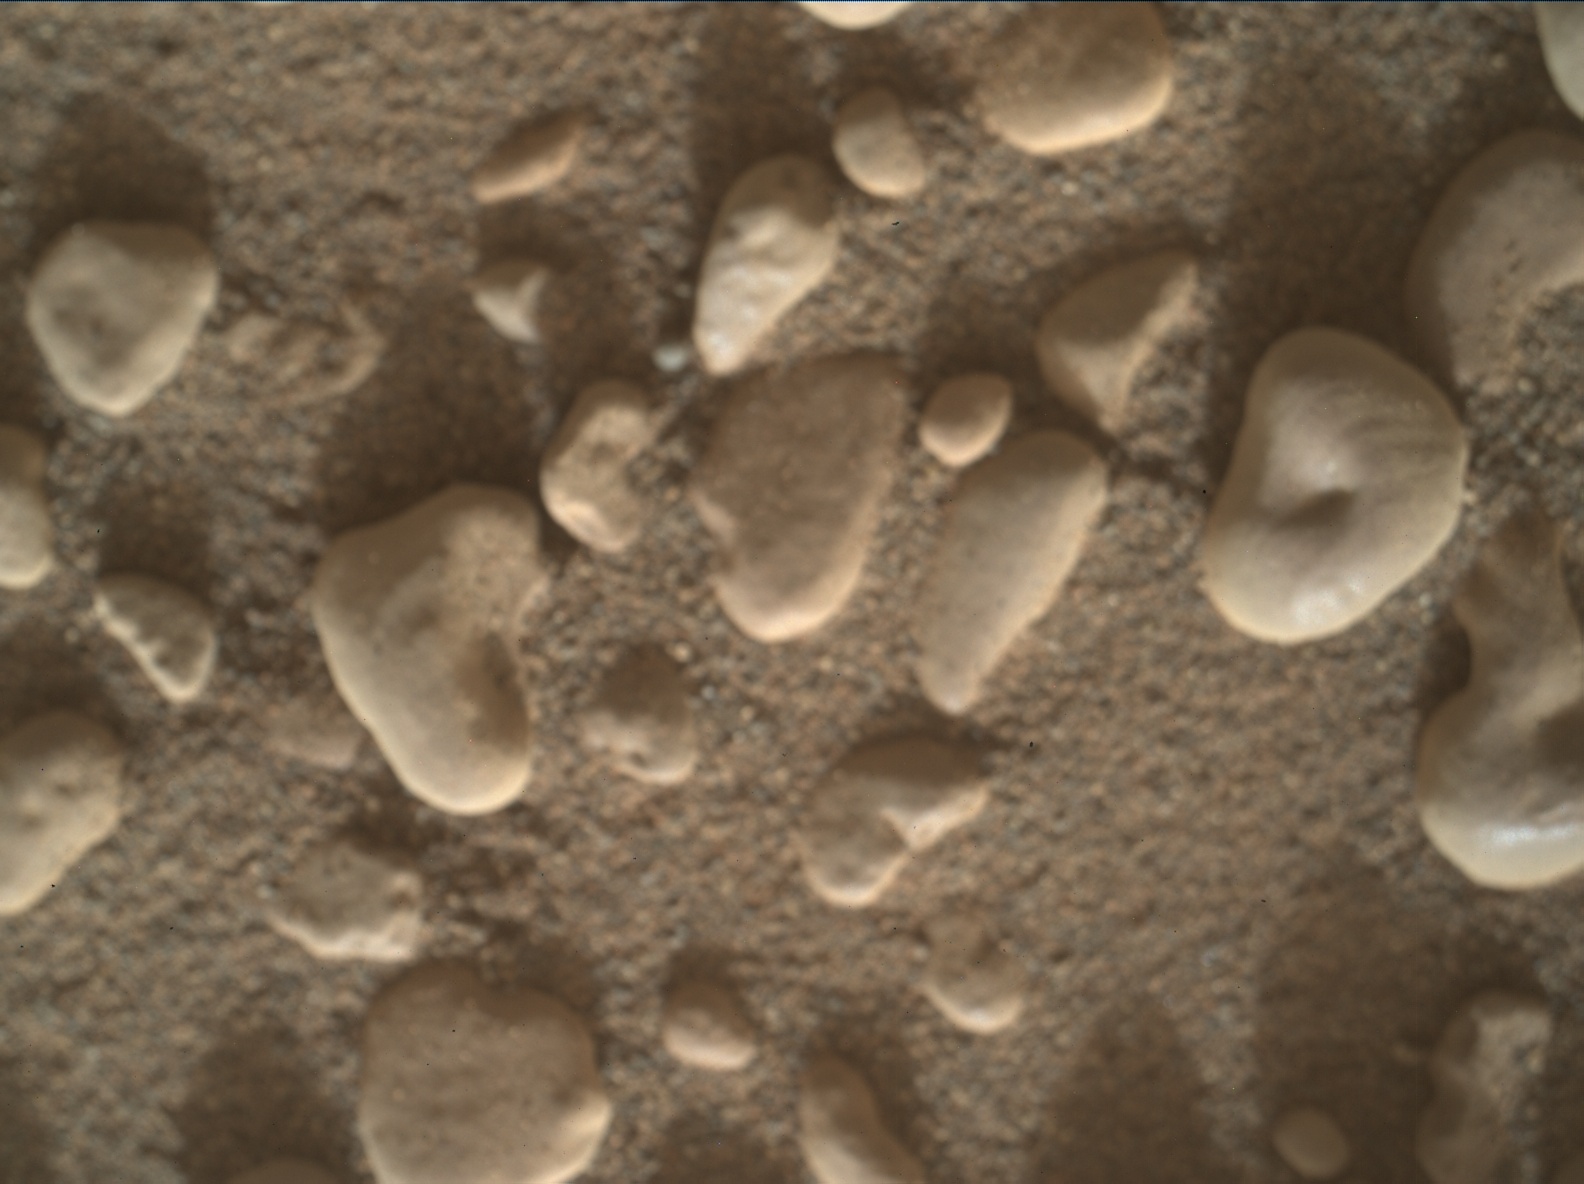 Nasa's Mars rover Curiosity acquired this image using its Mars Hand Lens Imager (MAHLI) on Sol 2437